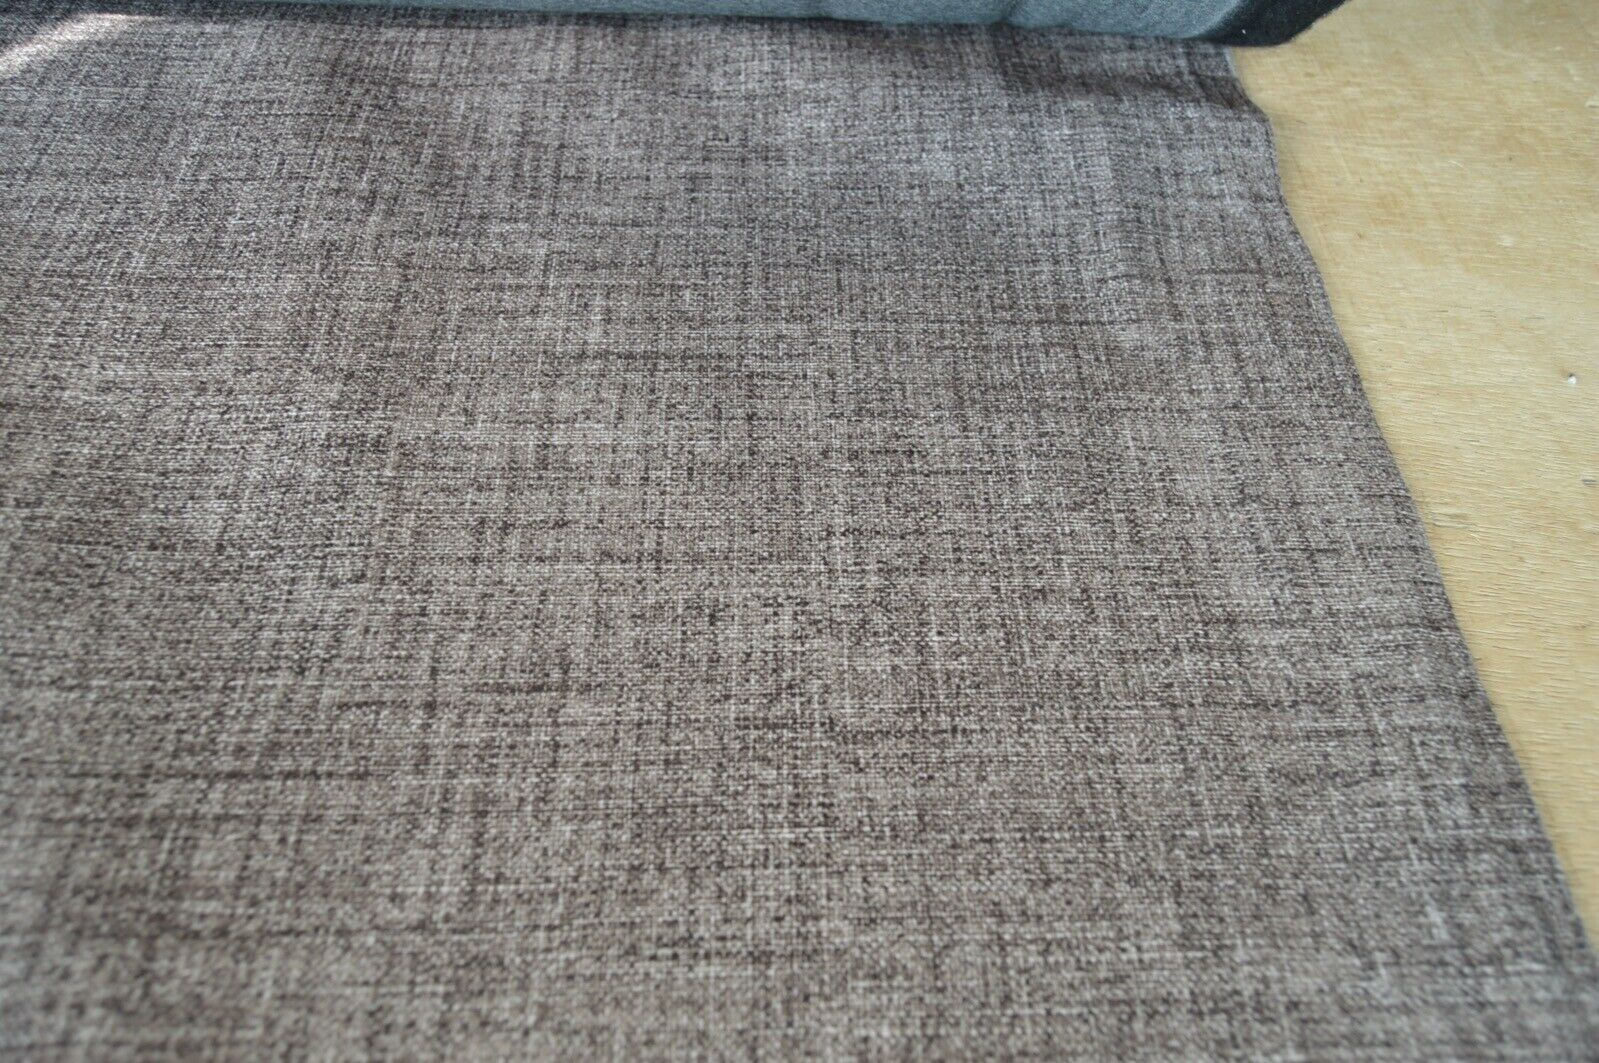 upholstery fabric maya brown super soft smoooth feel thick robust ...